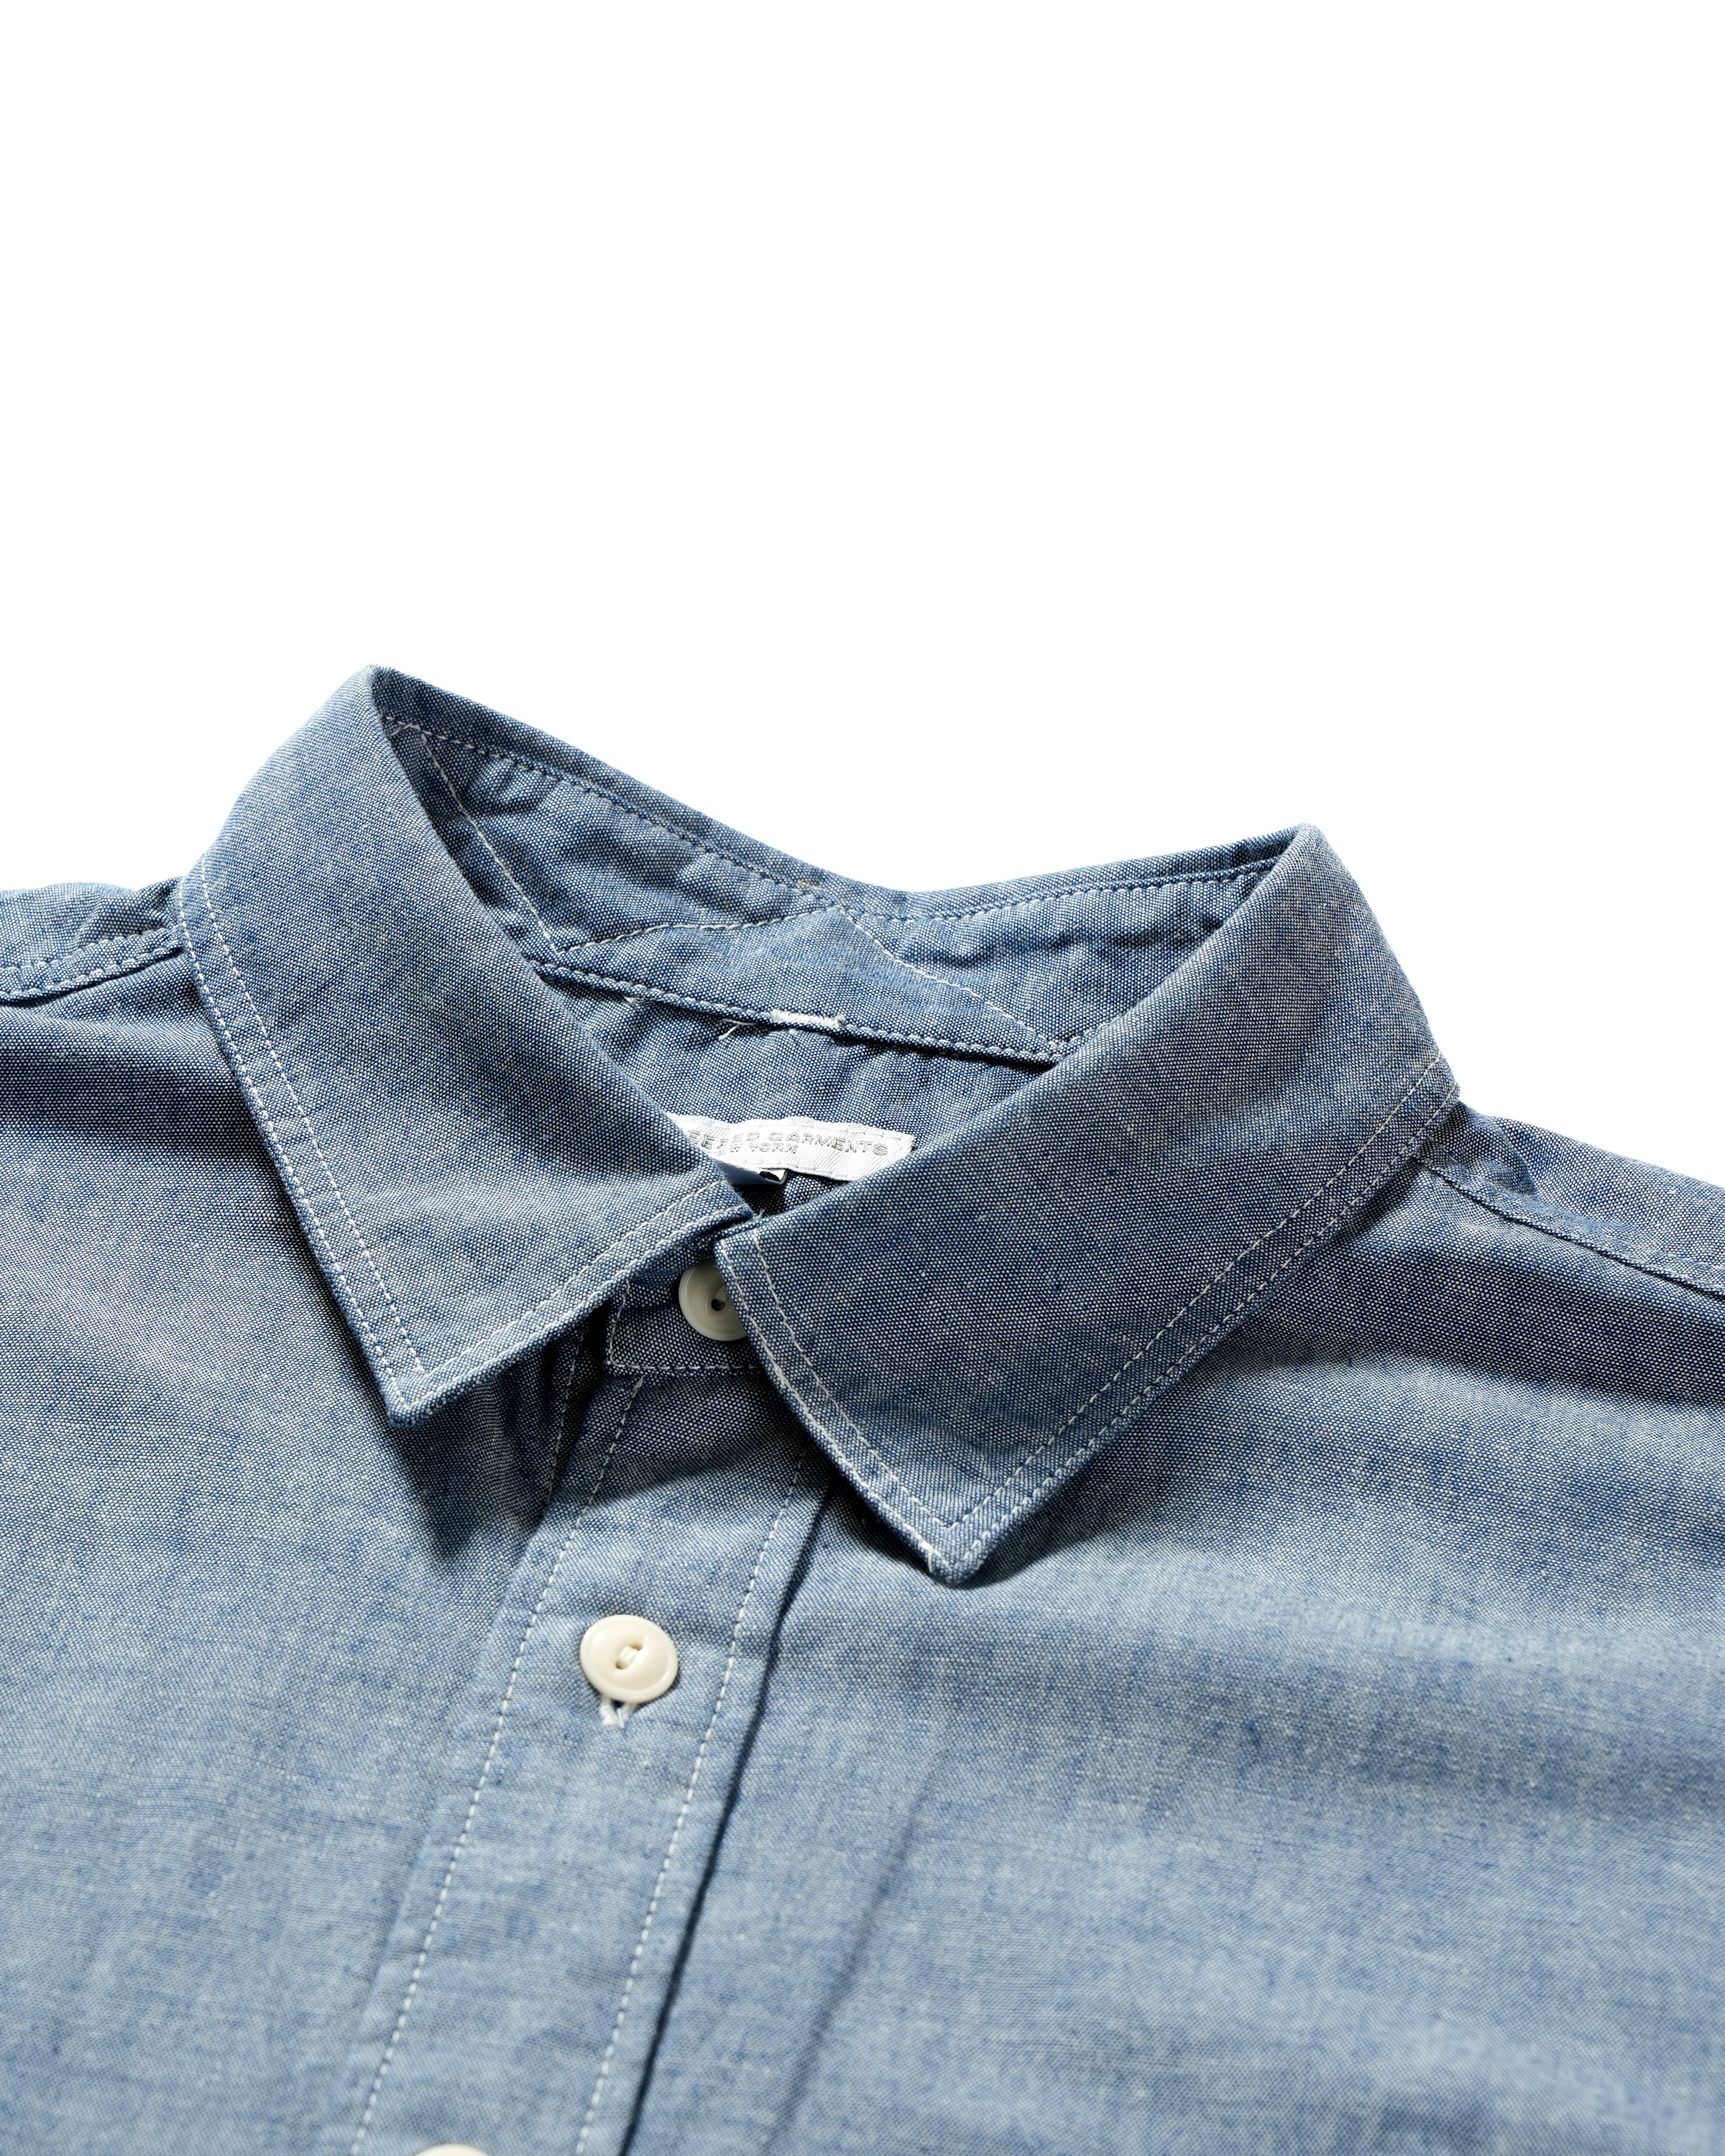 Field Shirt - Blue Cotton Chambray - NNY SP